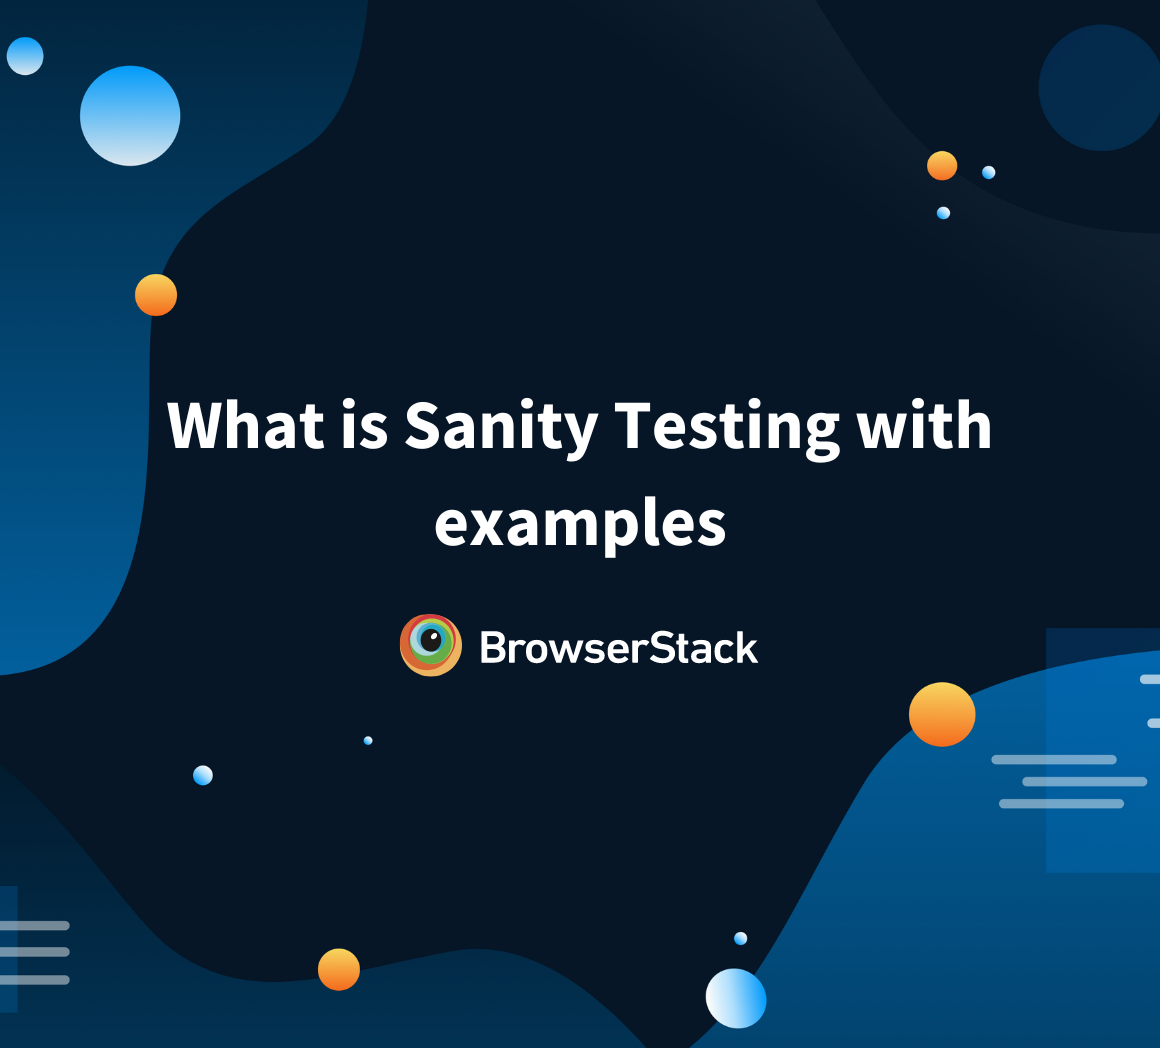 What is Sanity Testing with examples